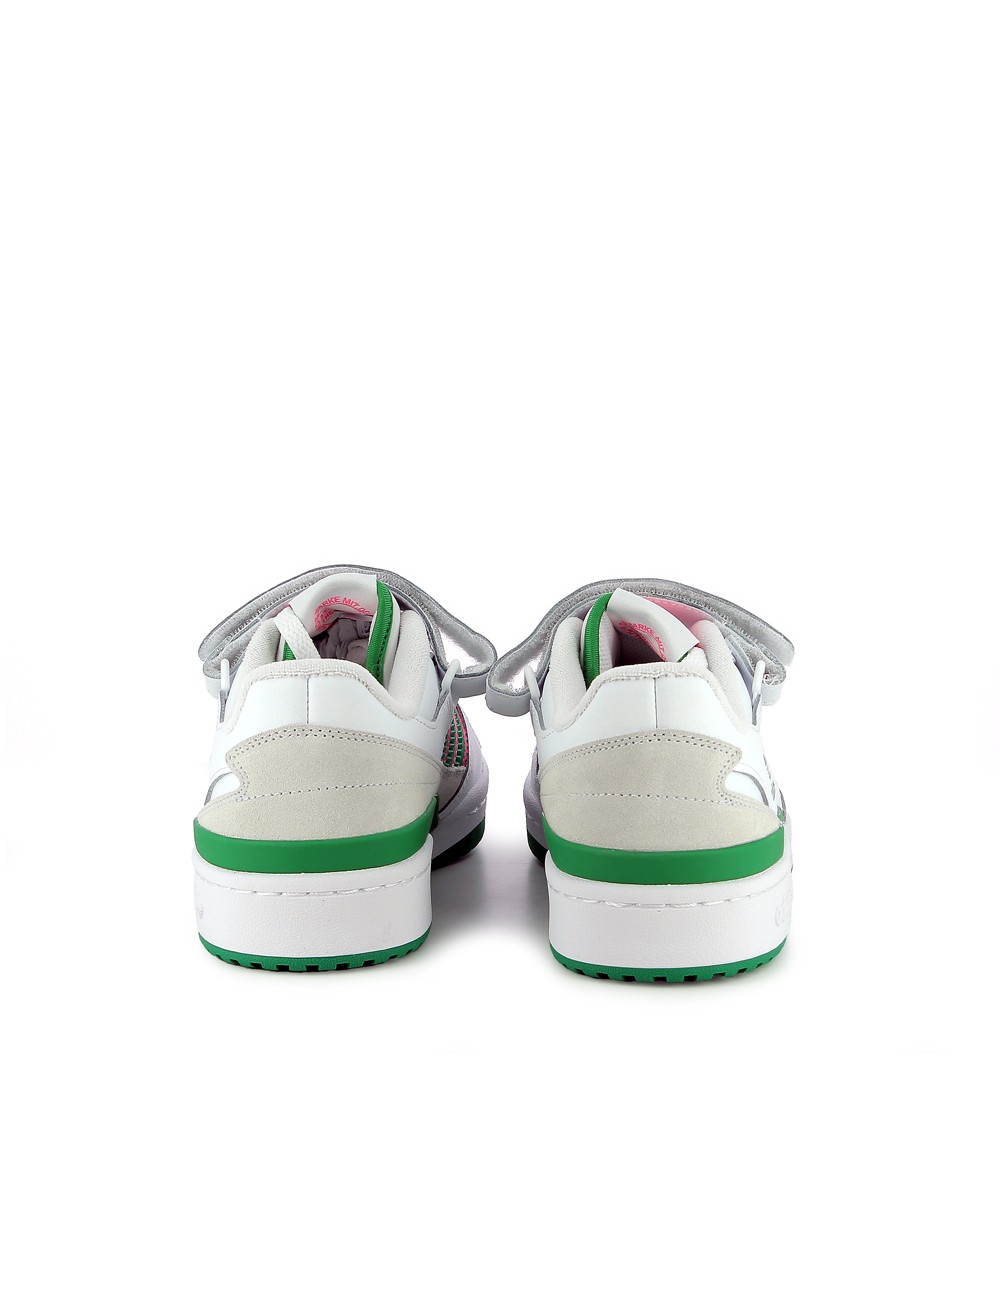 Adidas Forum Low W Cloud White Green Lucid Pink IE7422